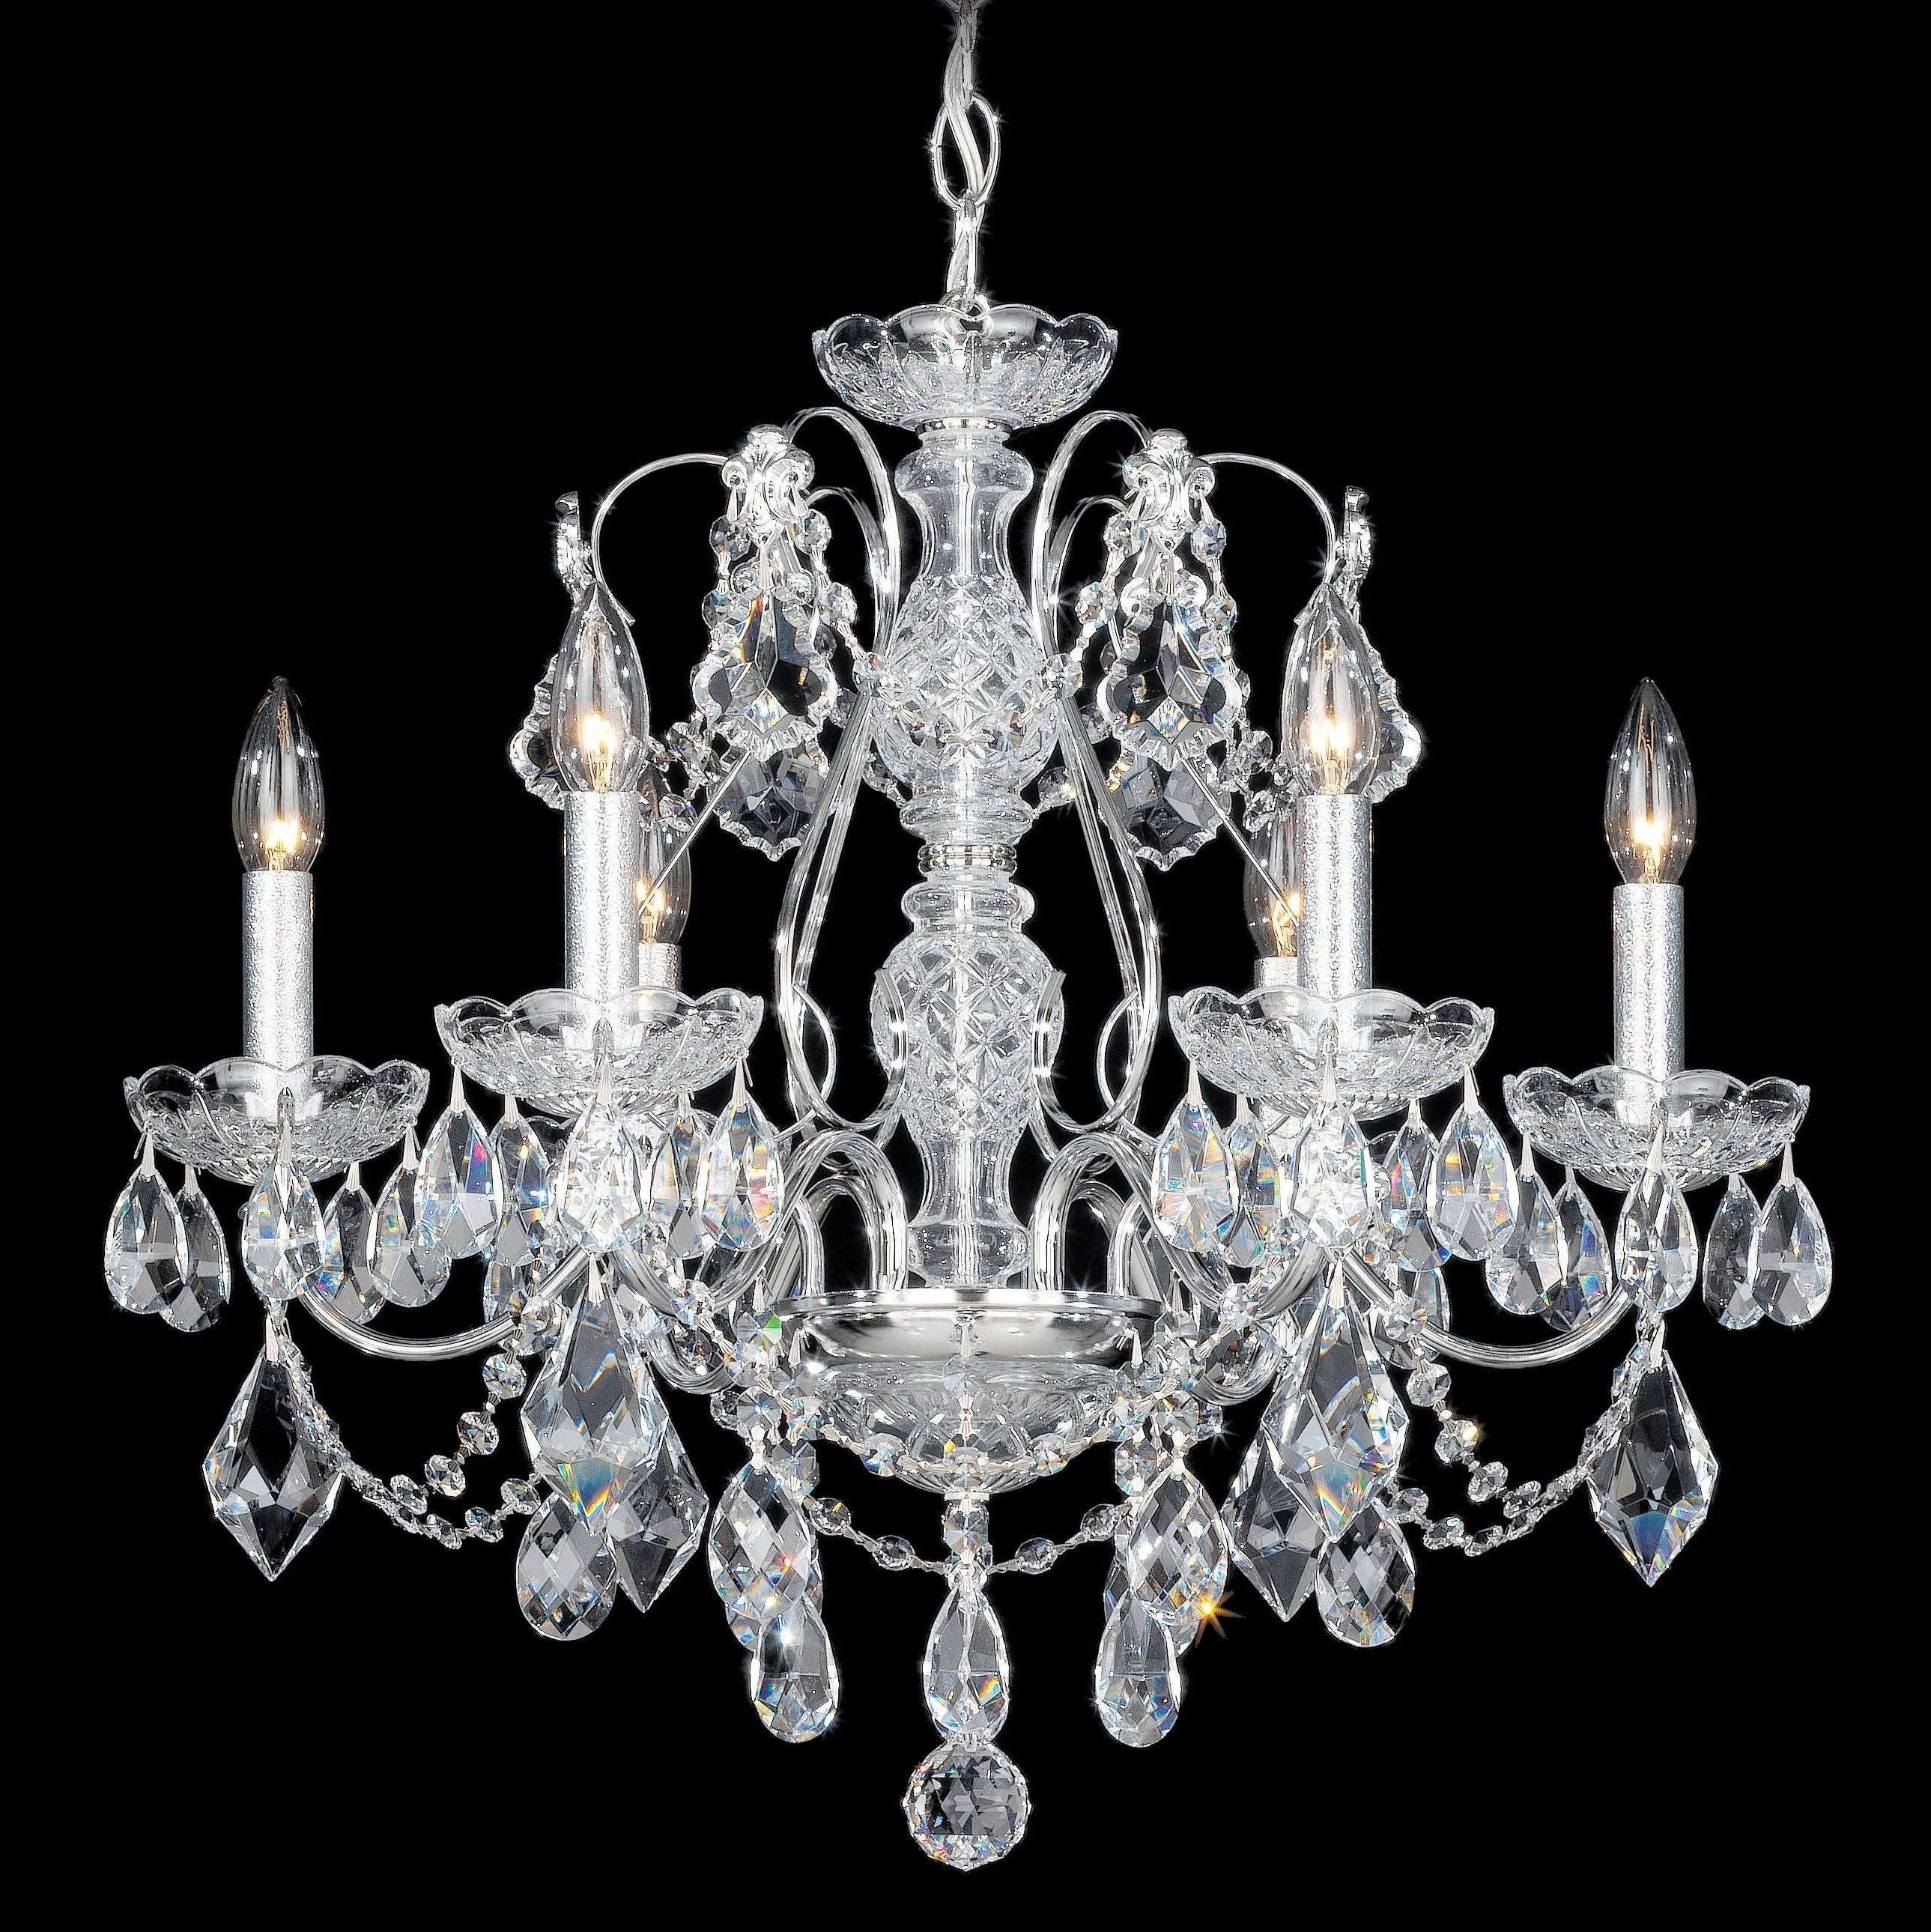 Lead Crystal Chandeliers For Newest Chandelier : Chandelier Beads Crystal Lamps Antique Crystal (View 4 of 15)